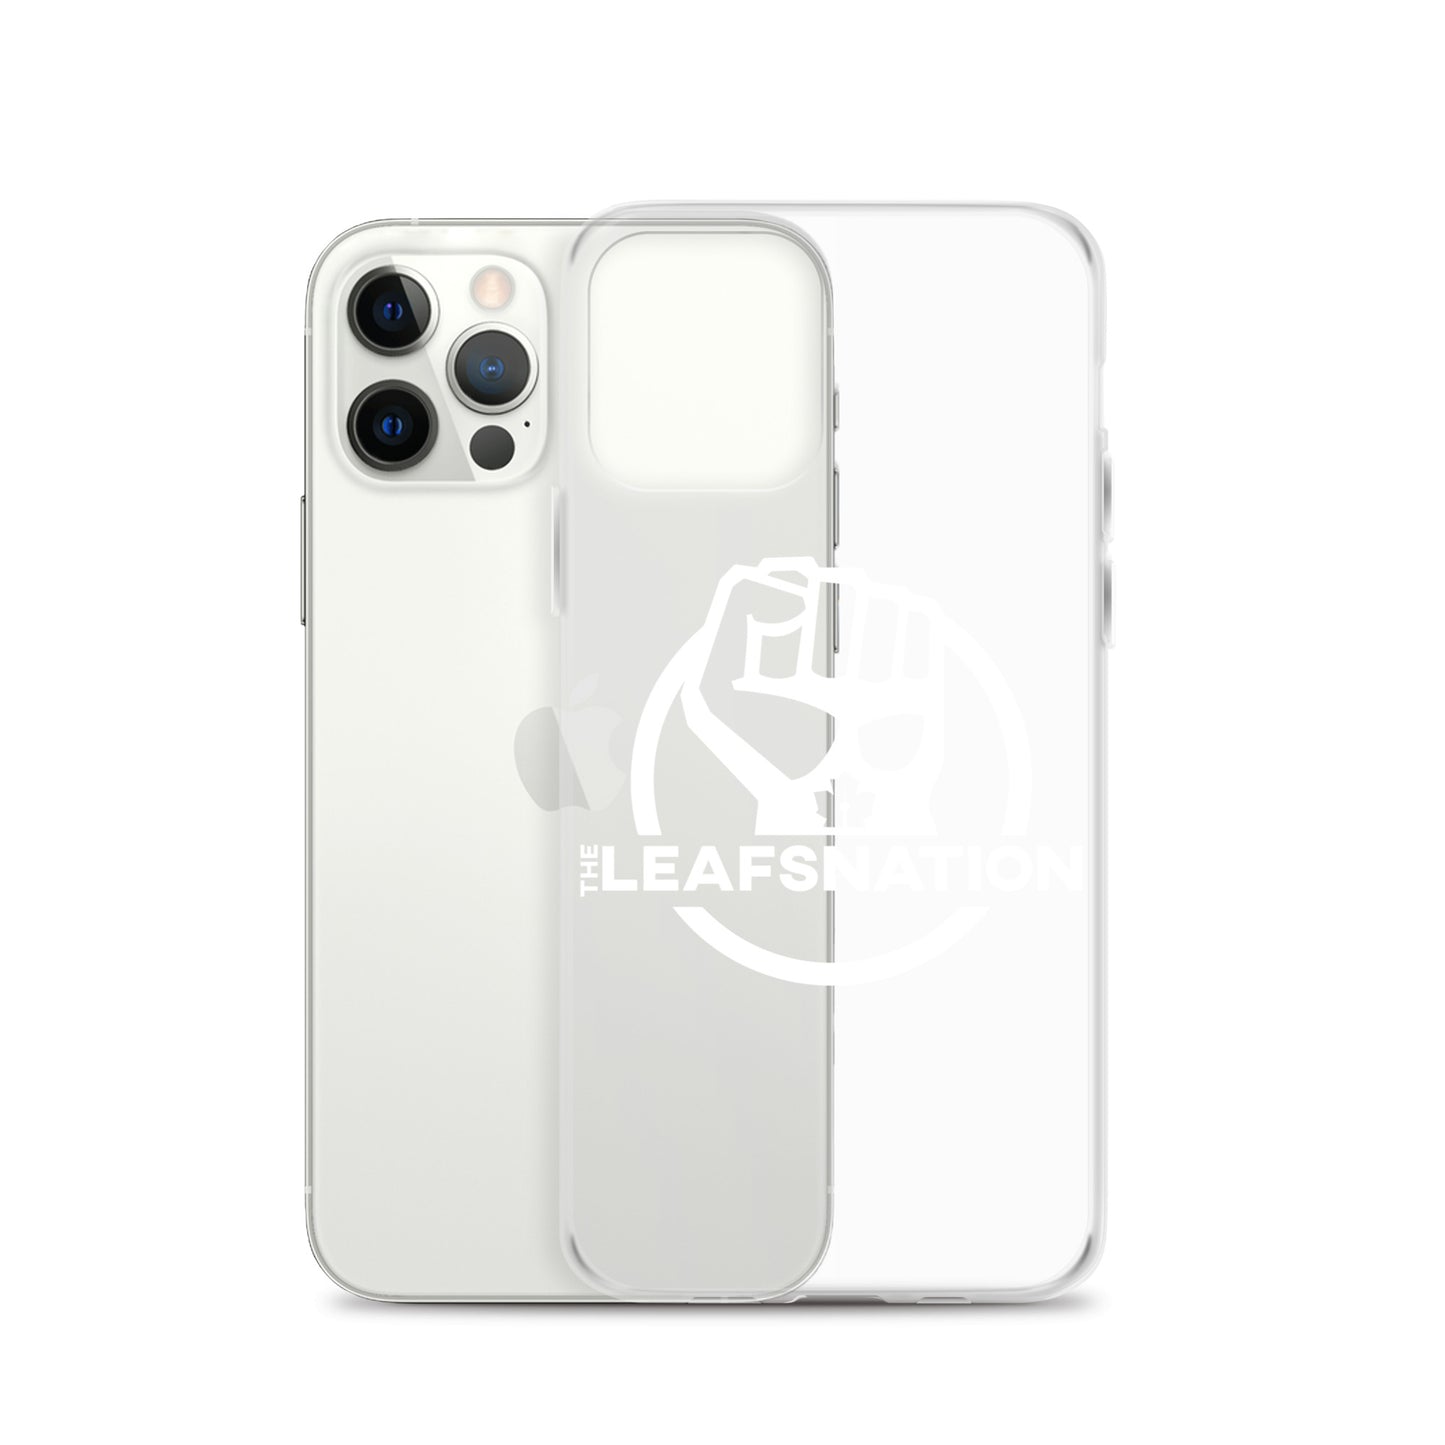 Leafsnation - Clear Case for iPhone® White Logo